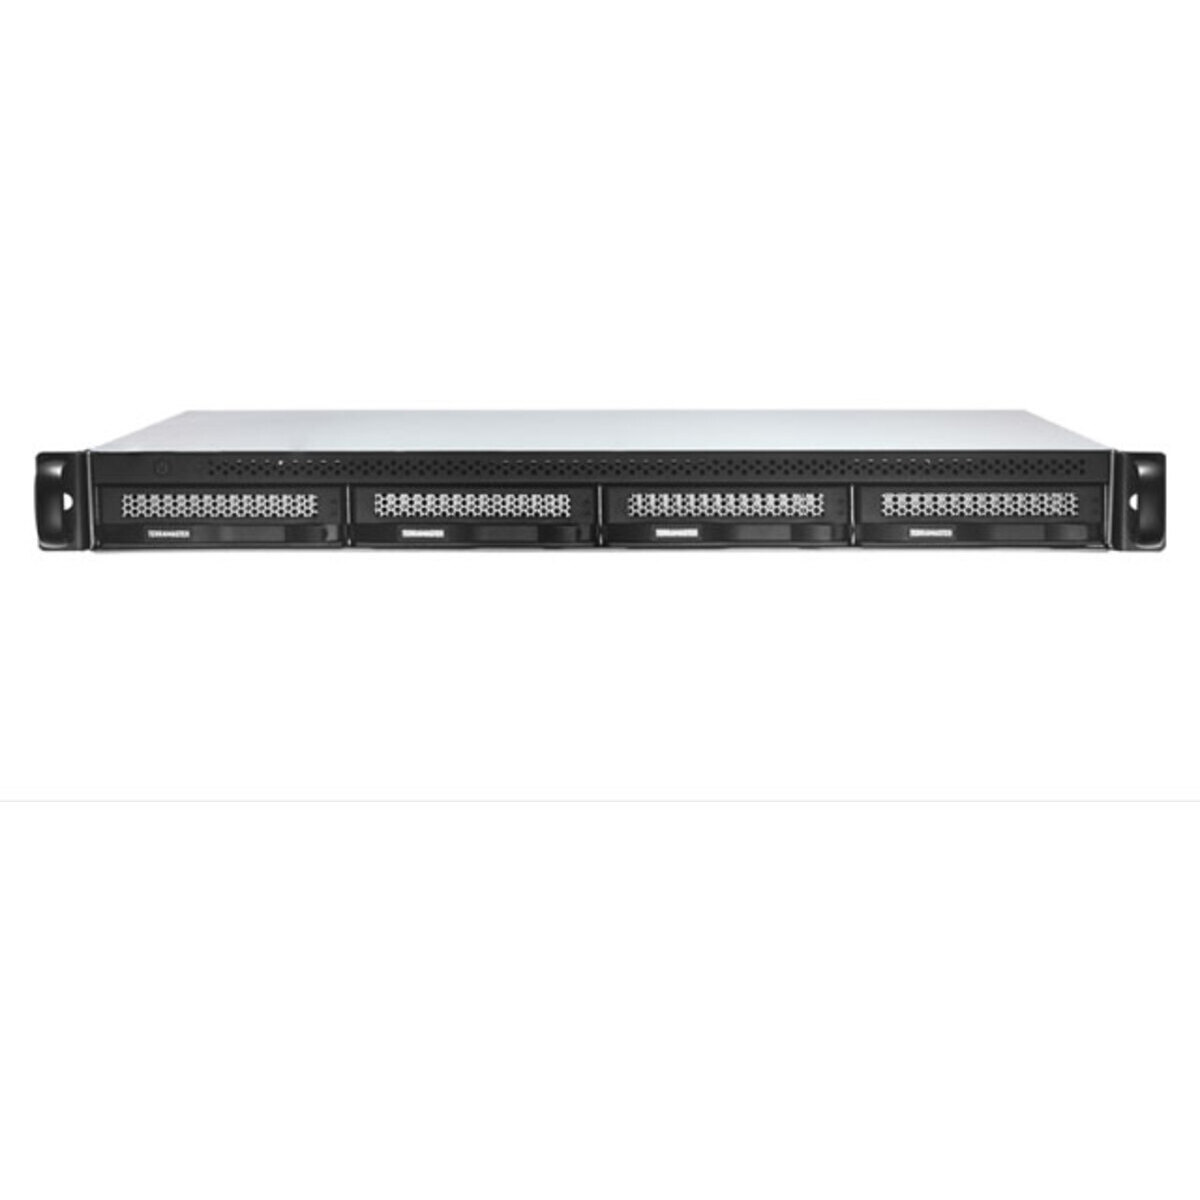 TerraMaster U4-423 42tb 4-Bay RackMount Multimedia / Power User / Business NAS - Network Attached Storage Device 3x14tb Western Digital Red Pro WD142KFGX 3.5 7200rpm SATA 6Gb/s HDD NAS Class Drives Installed - Burn-In Tested - FREE RAM UPGRADE U4-423